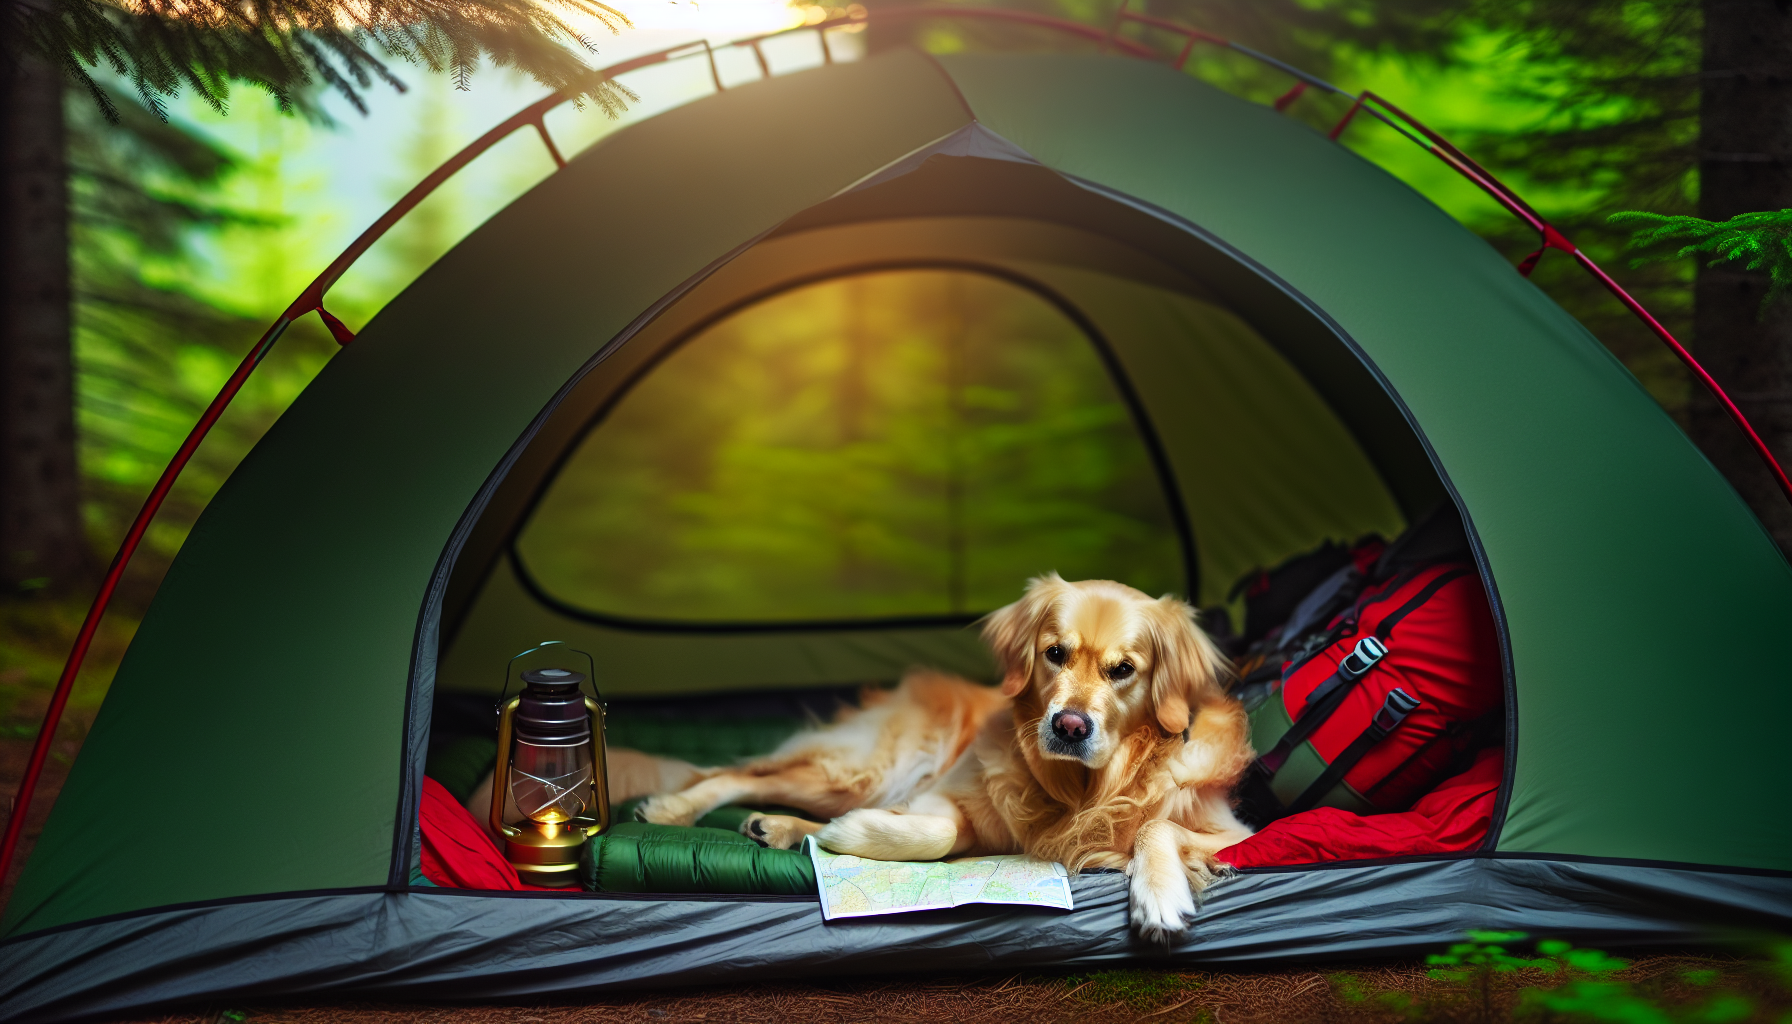 Is Camping with Dogs a Good Idea?